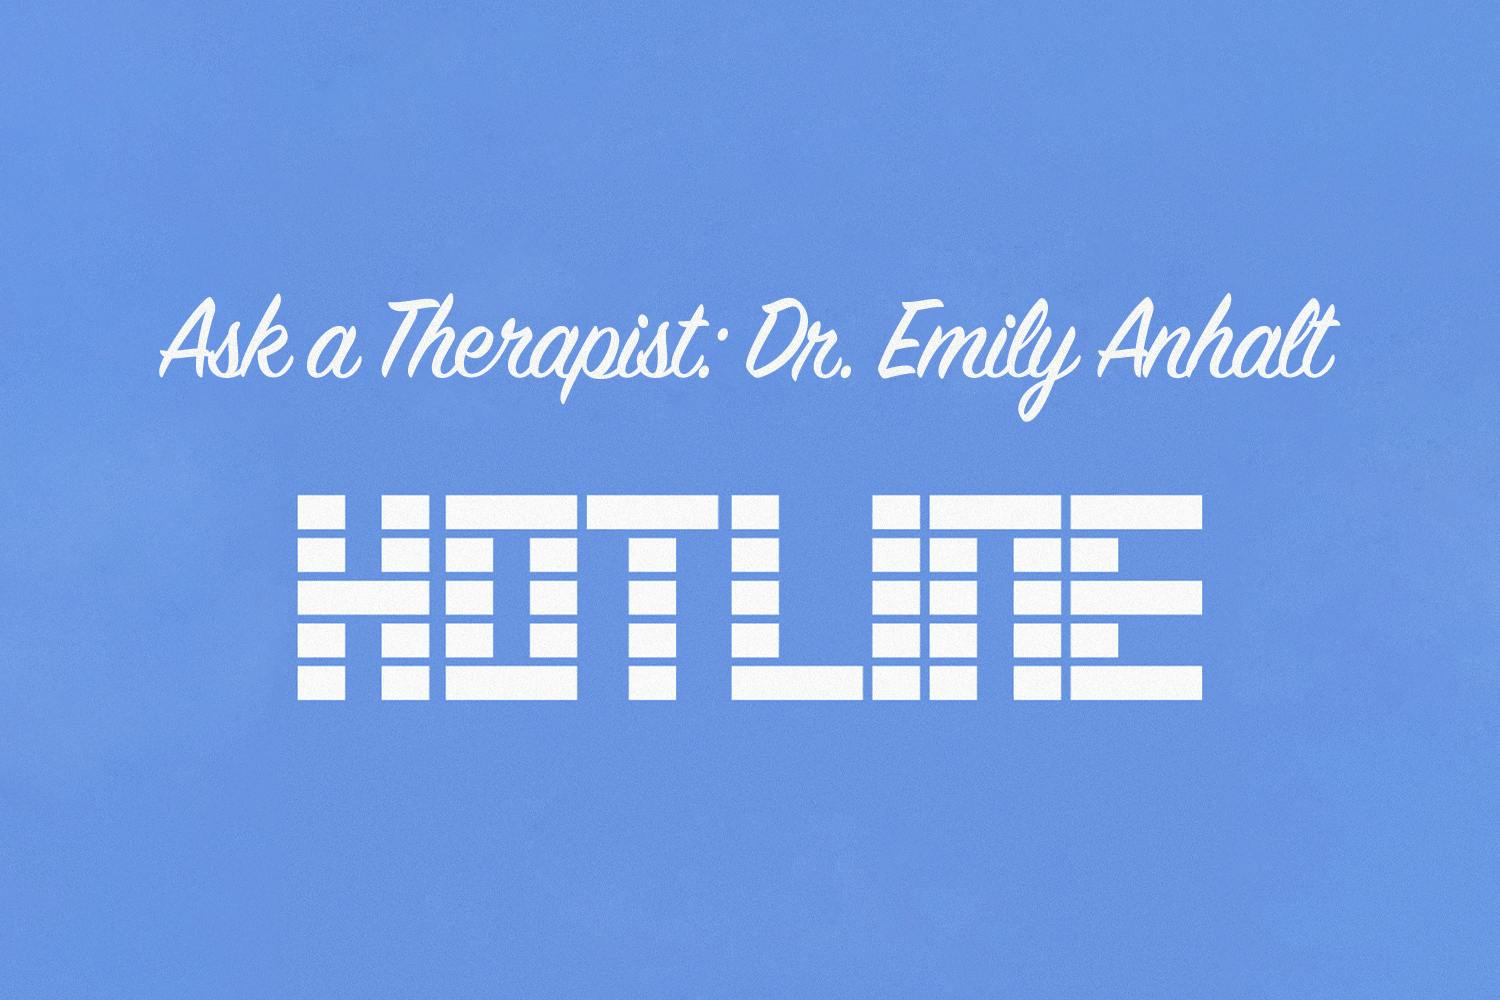 Ask a Therapist: Dr. Emily Anhalt